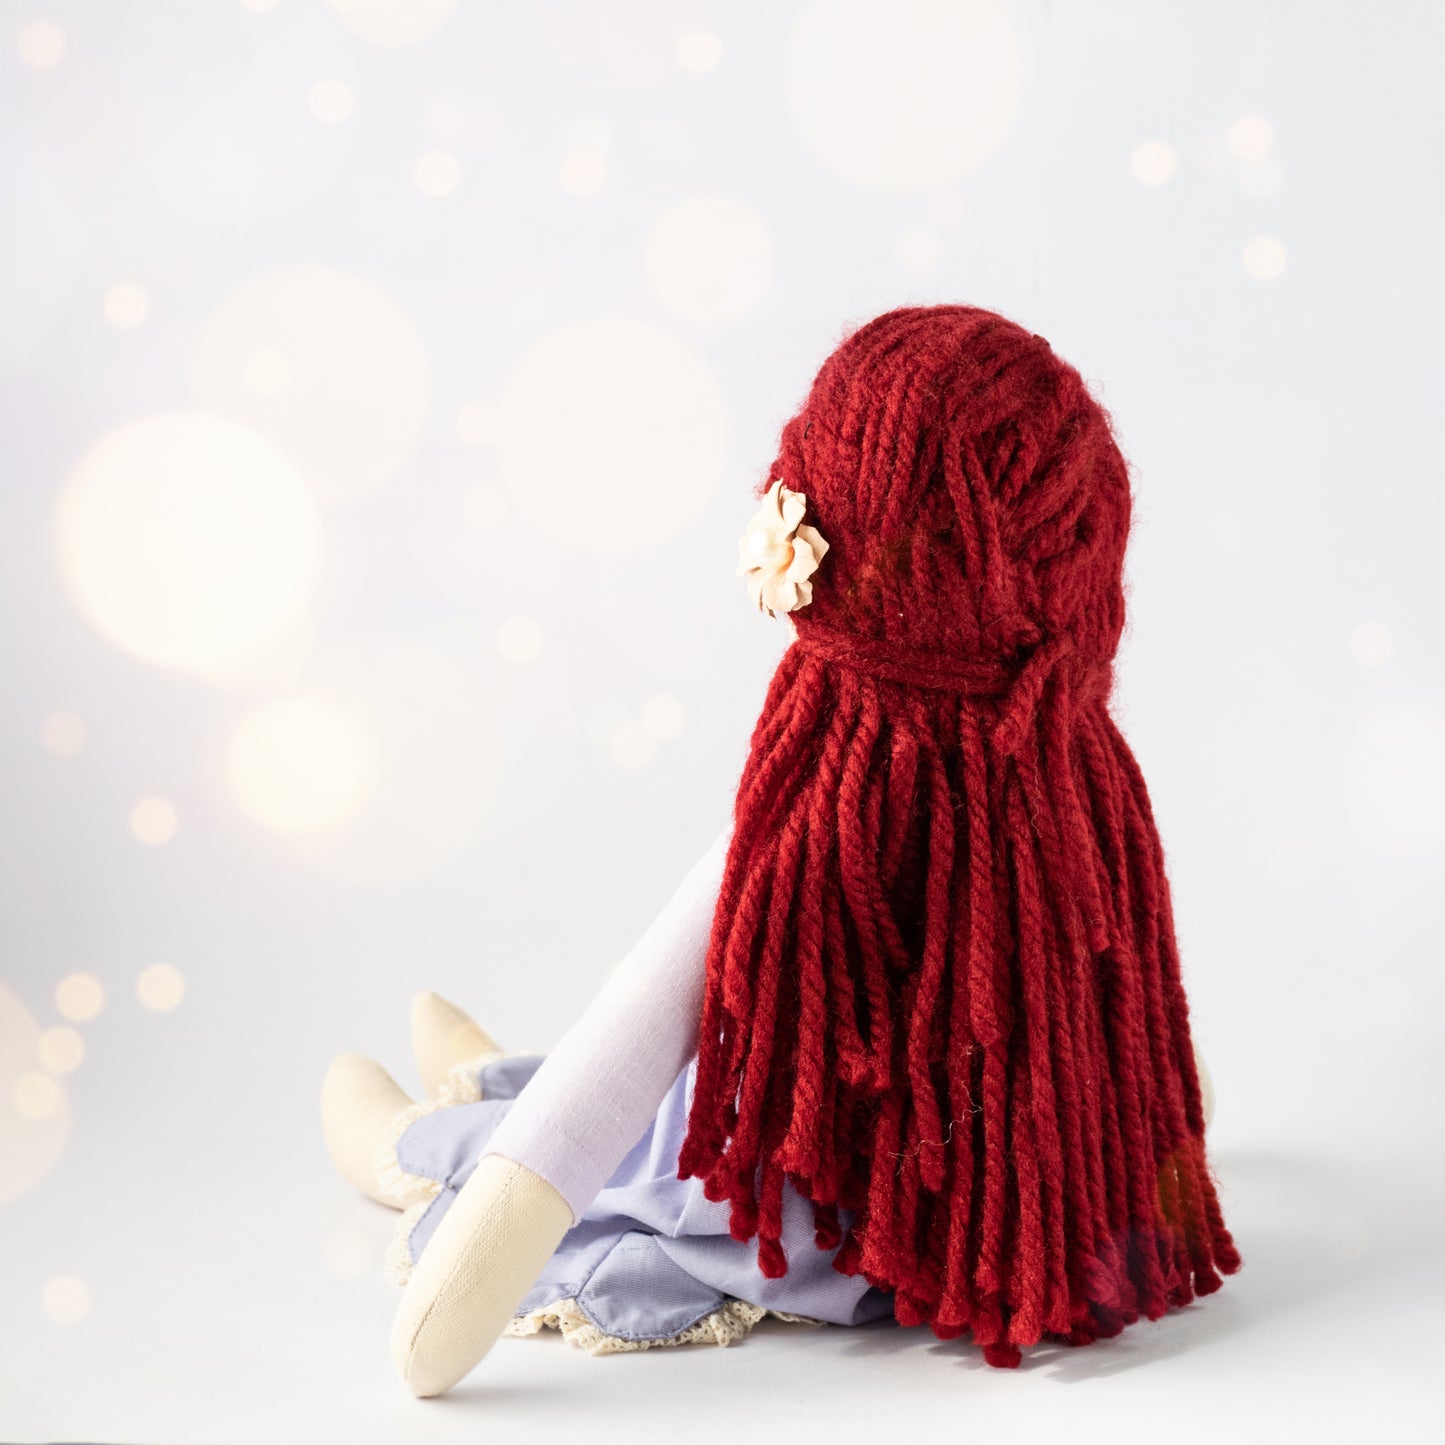 BROOKLYN - The Doll With Red Long Hair